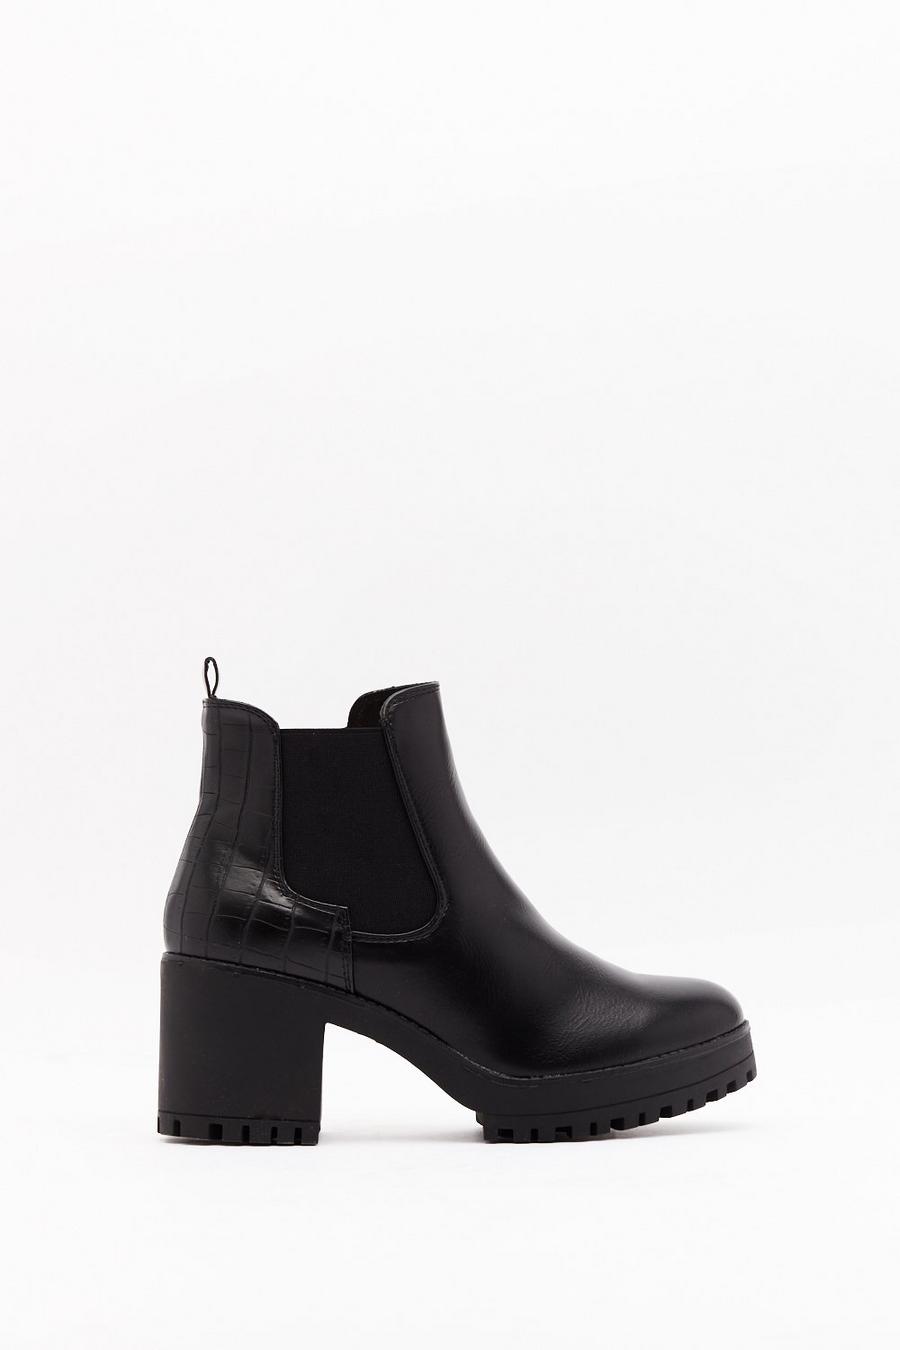 Croc Faux Leather Heeled Chelsea Boots